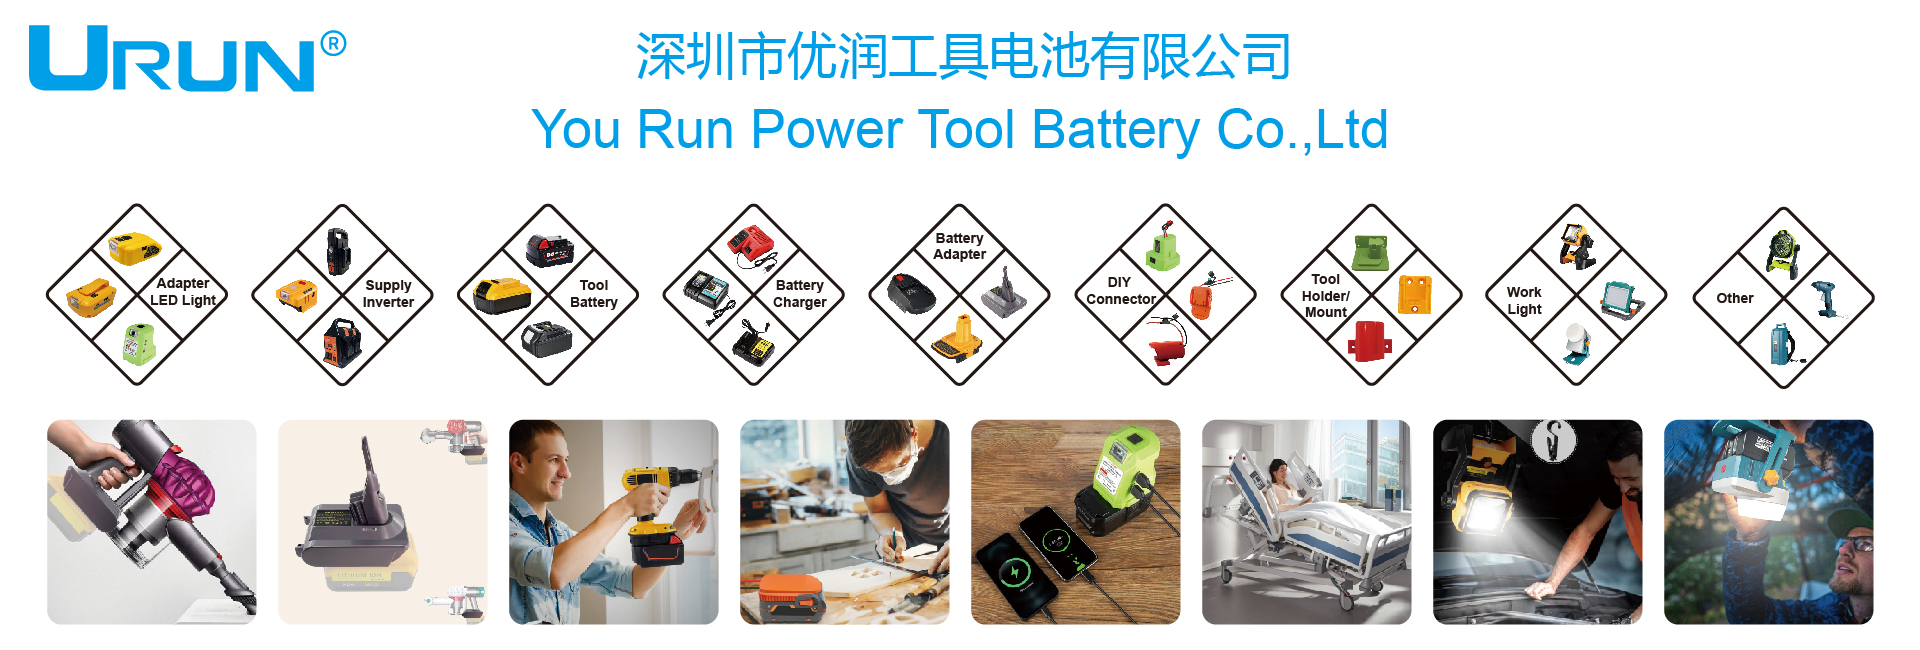 Power Tool, Electrical Tools, Rechargeable Battery - Yourun